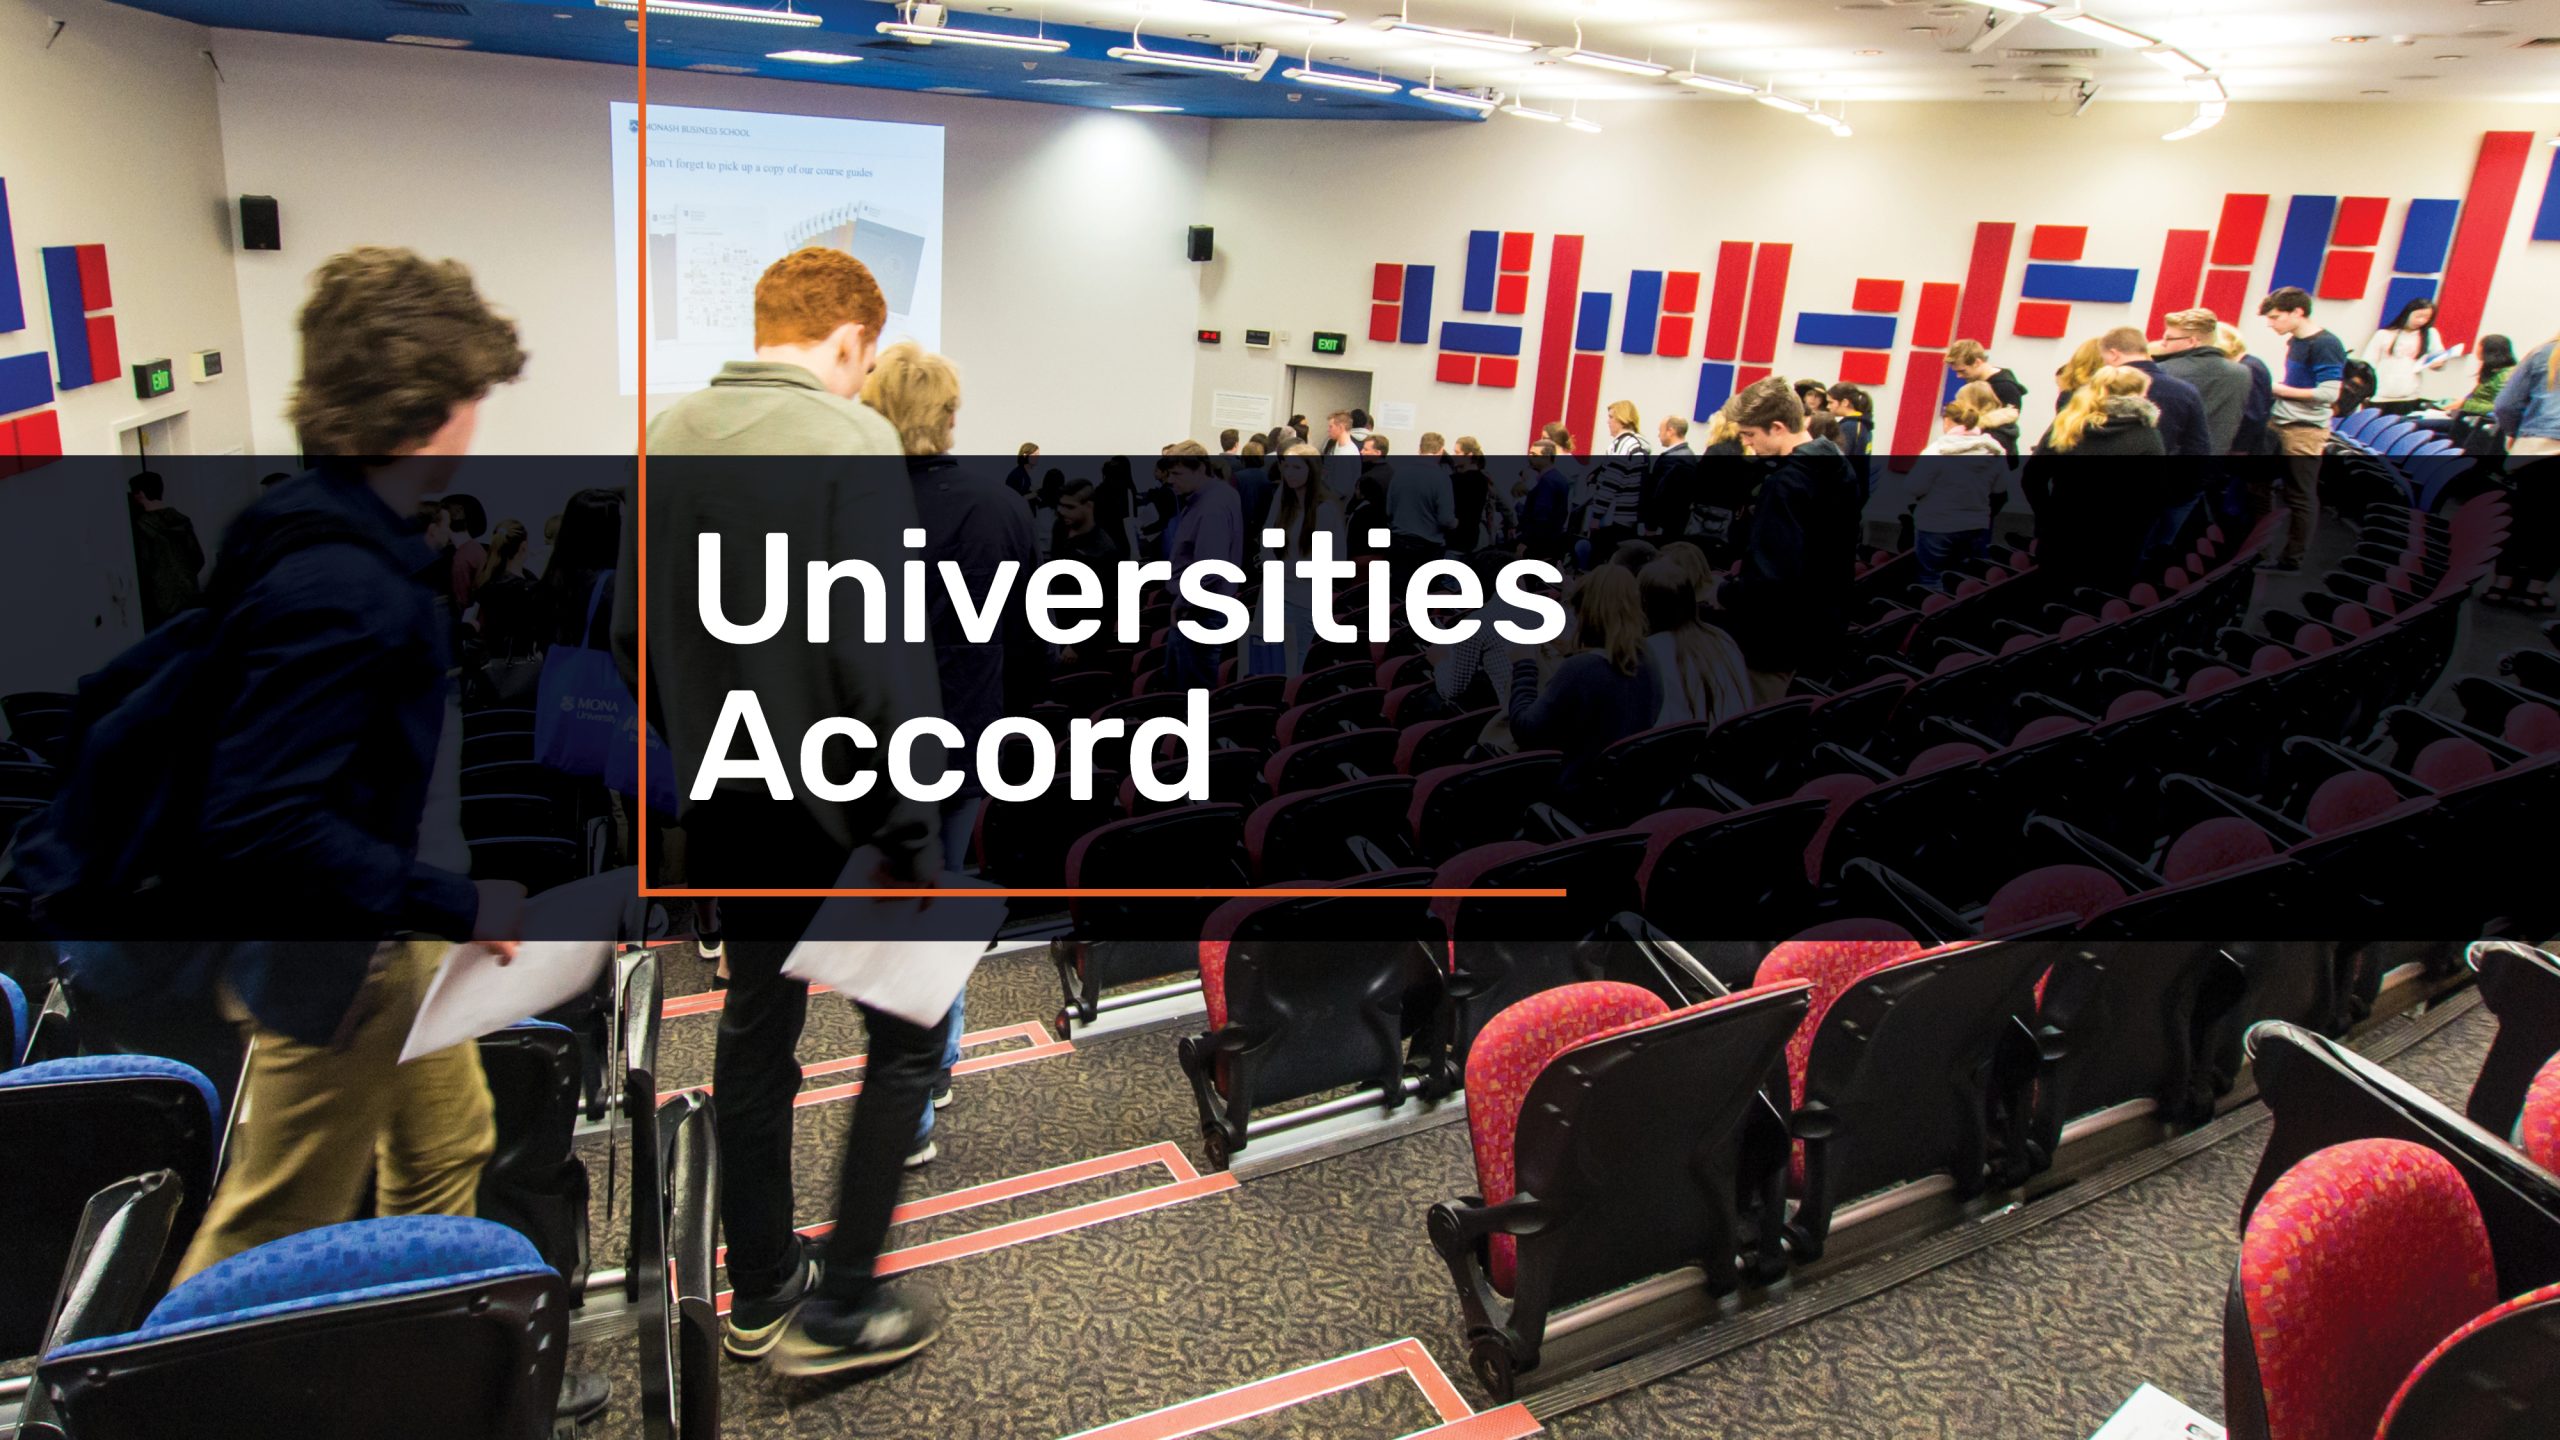 People leaving a lecture hall with the text "Universities Accord" over the top.